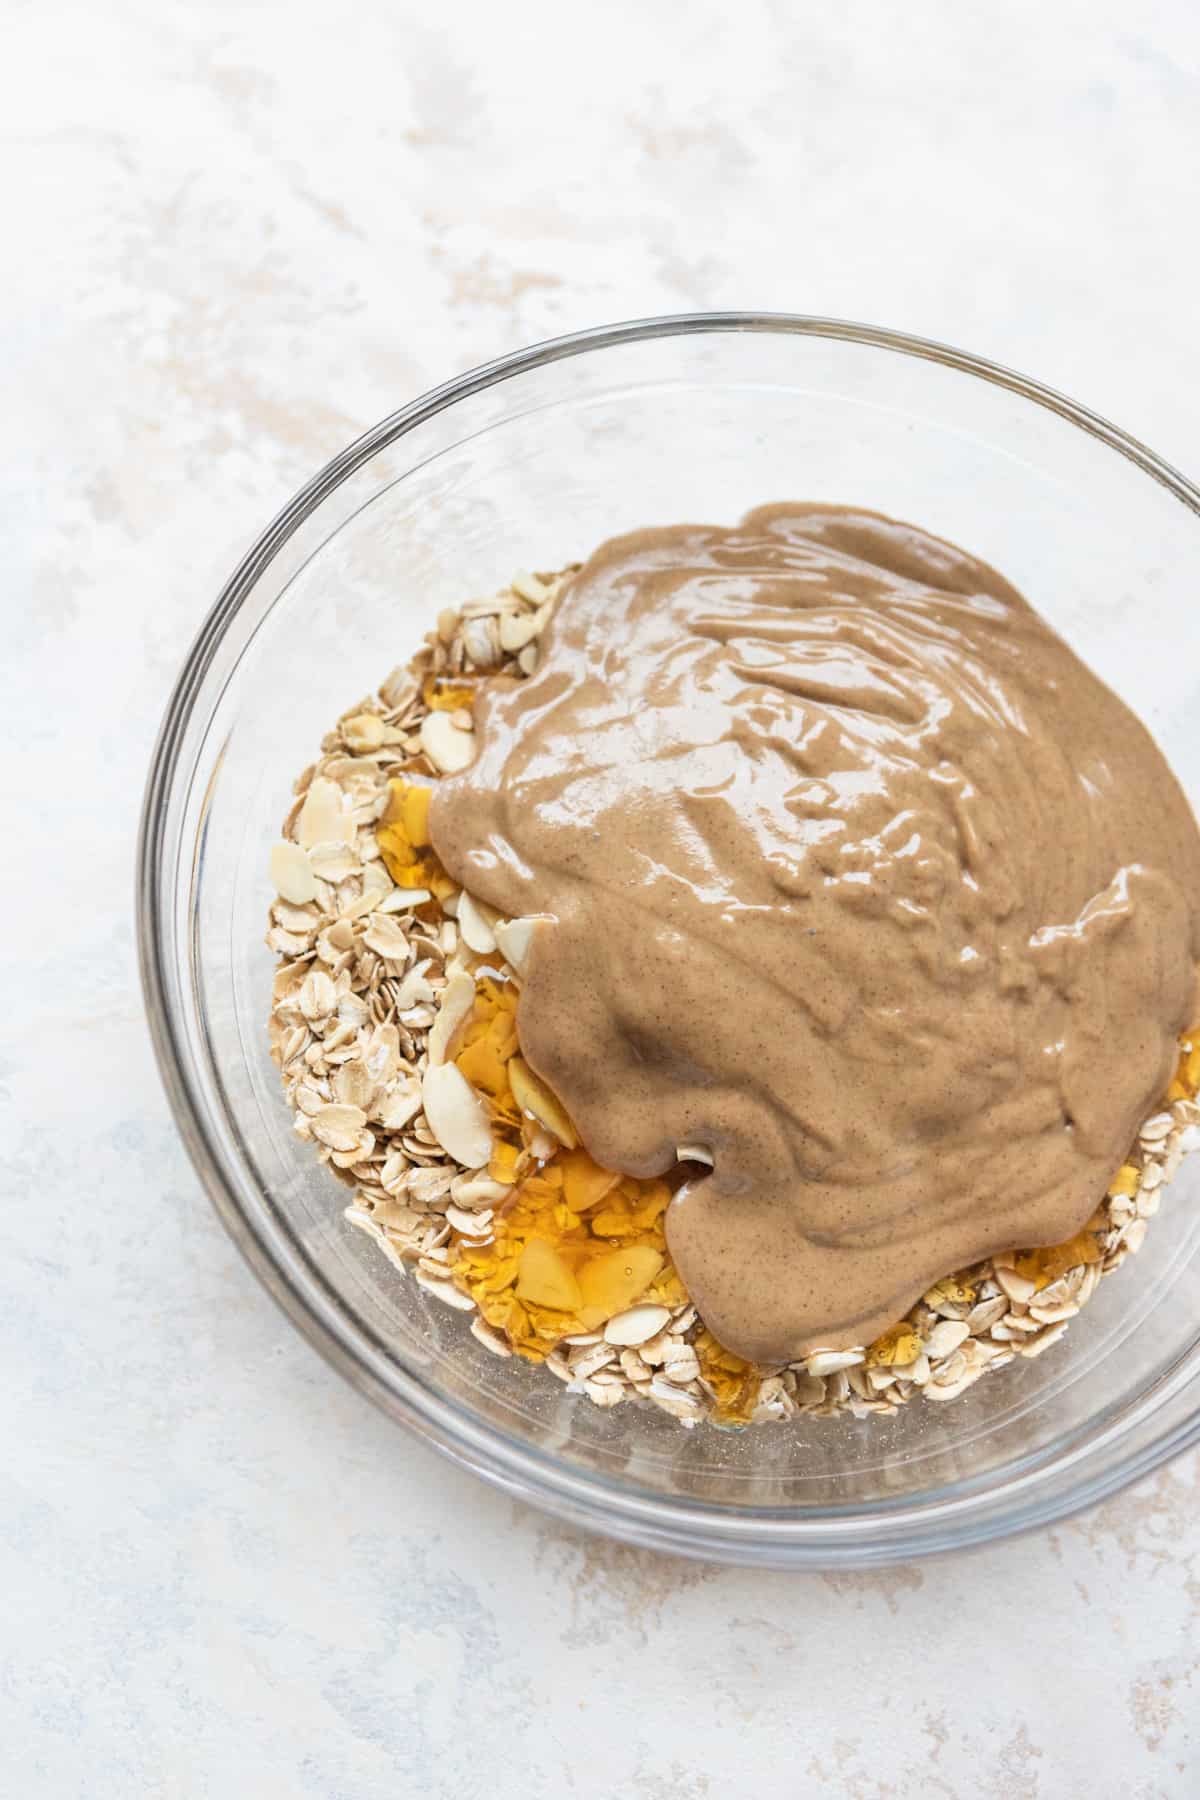 Oats, almonds, honey, and almond butter in a bowl.